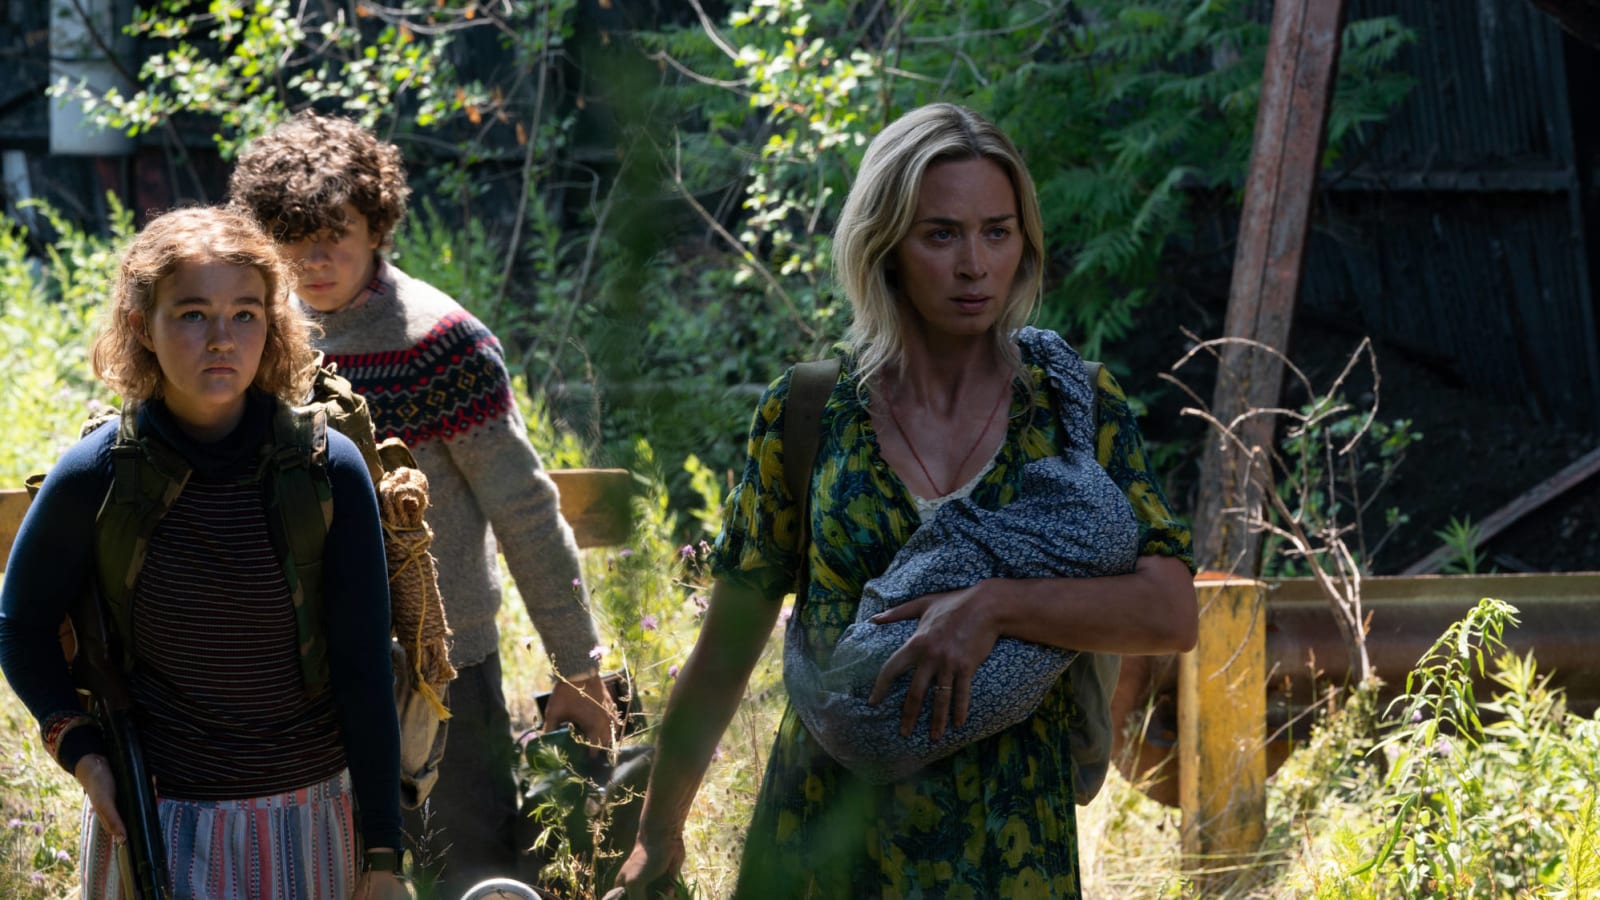 The third installment of 'A Quiet Place' is due March 2023